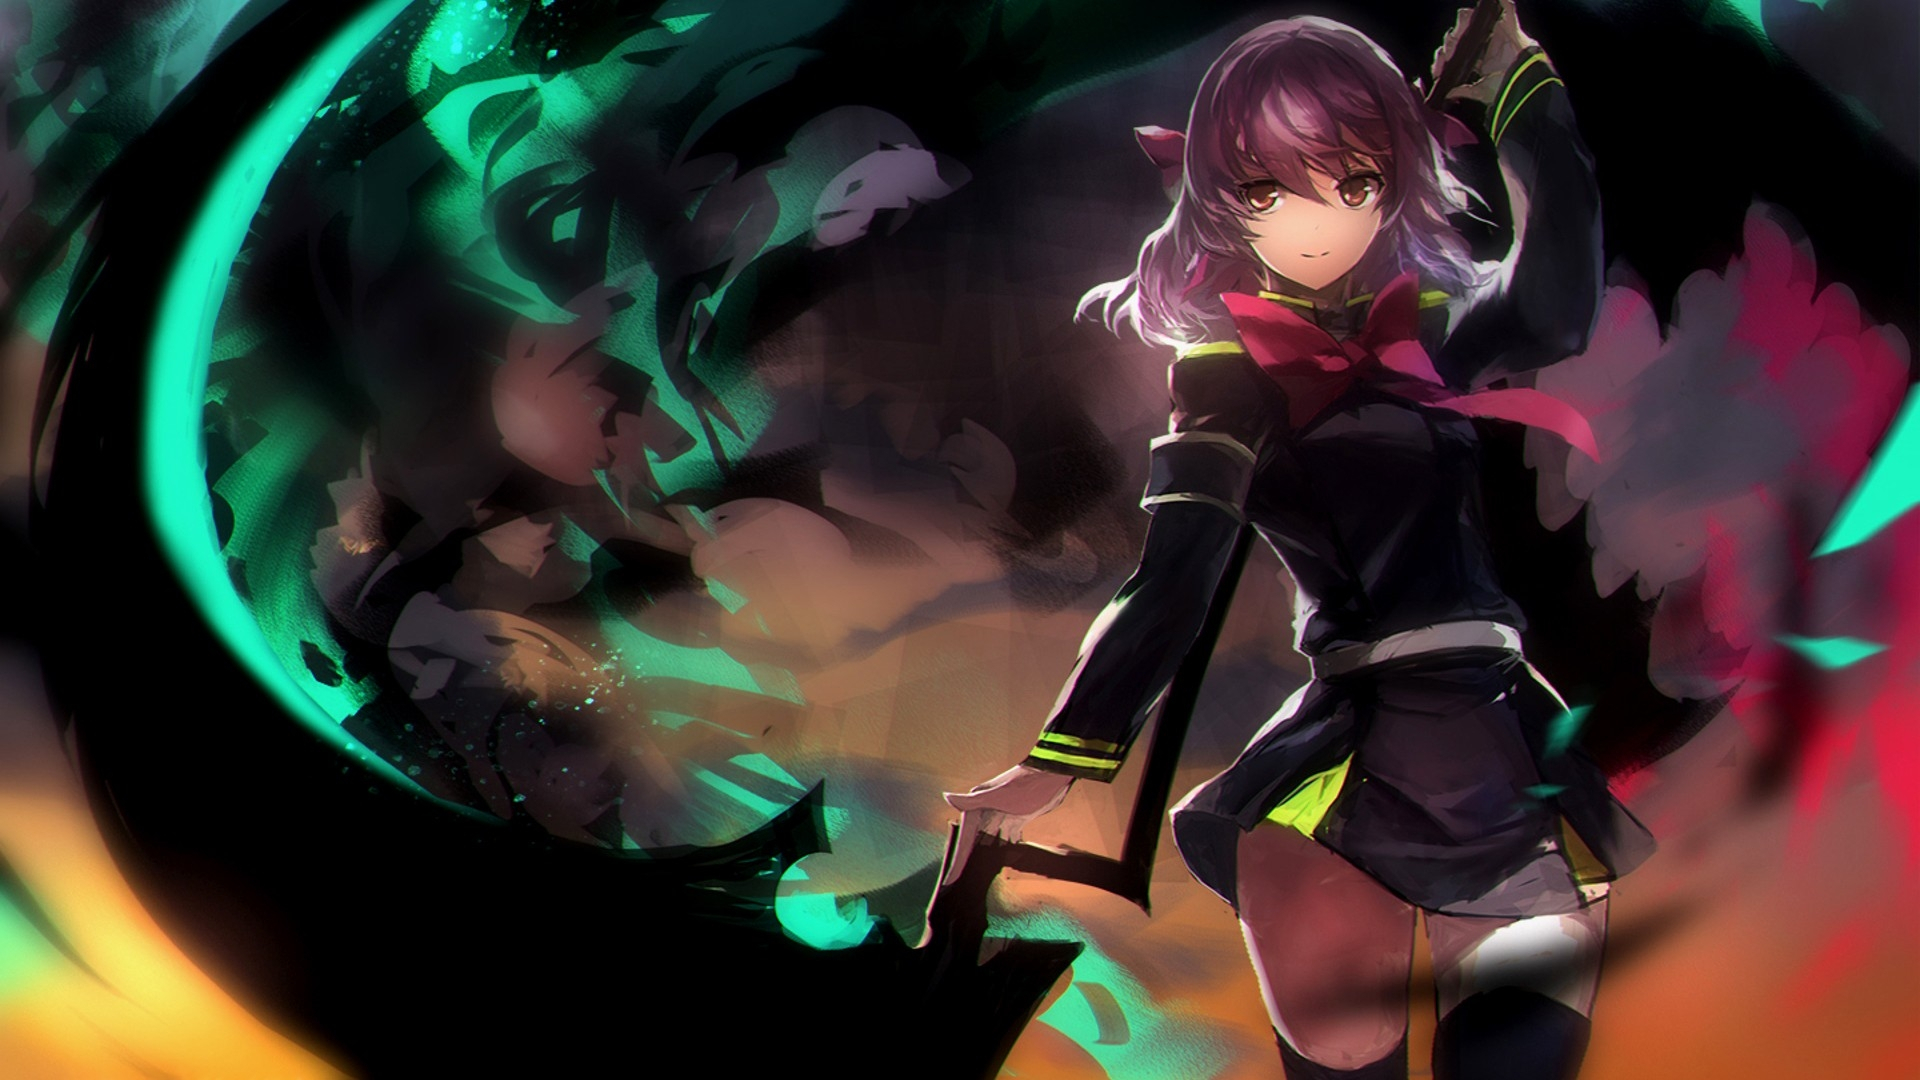 1920x1080 150+ Seraph of the End HD Wallpapers and Backgrounds